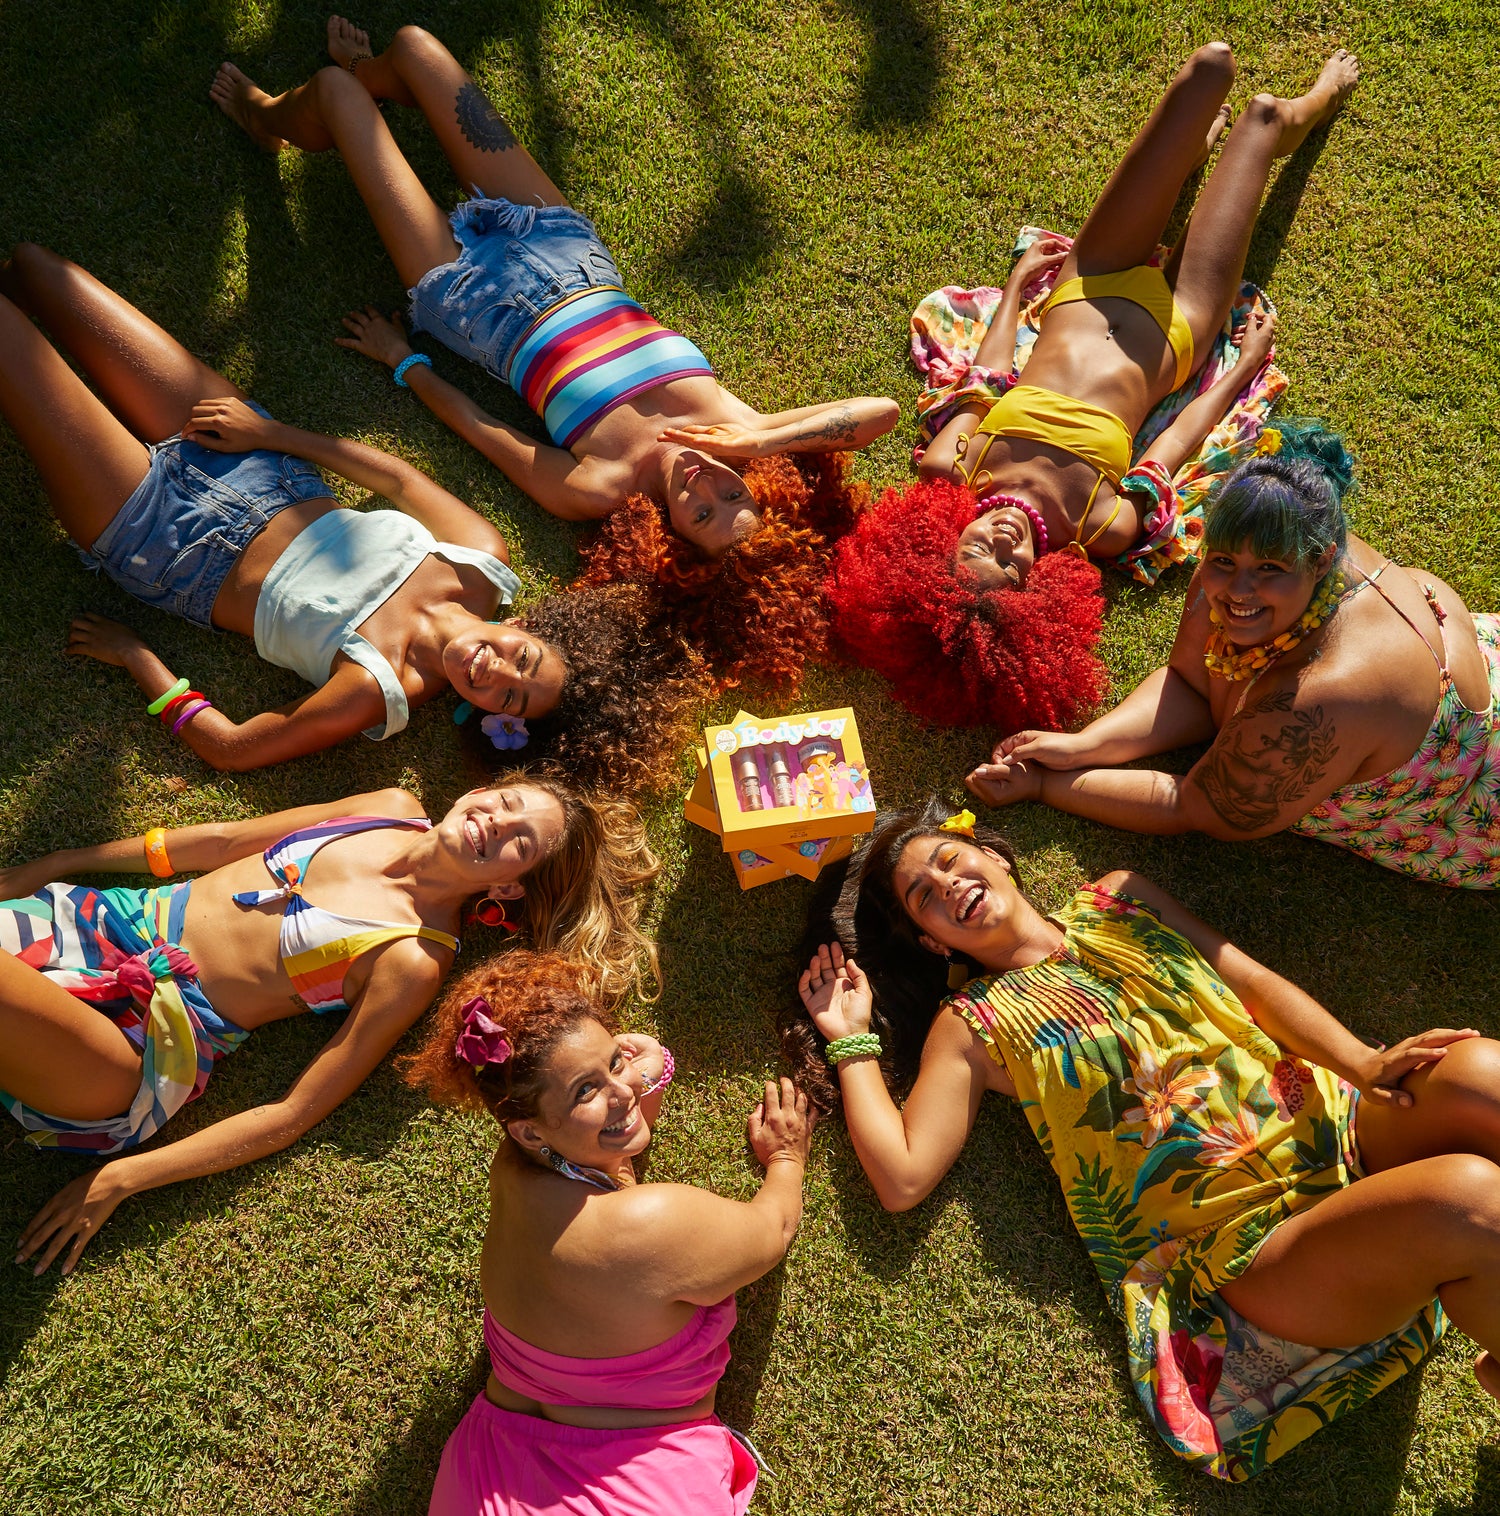 Group of people laying down on grass